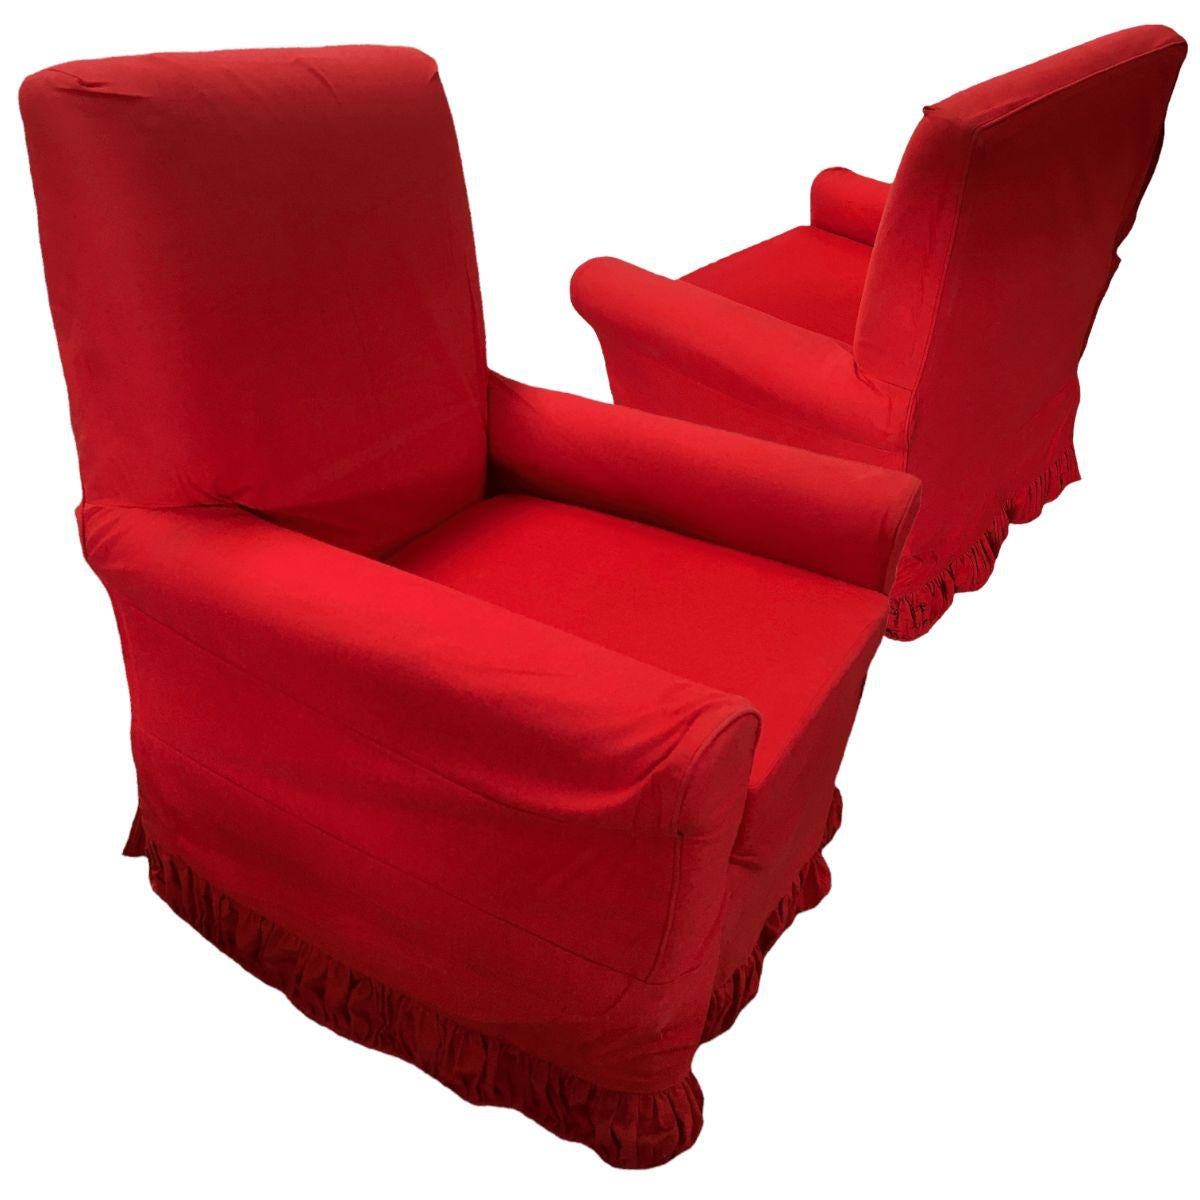 White Muslim lounge armchairs with red cover and skirt. $950 each
 
These chairs were part on the set of 